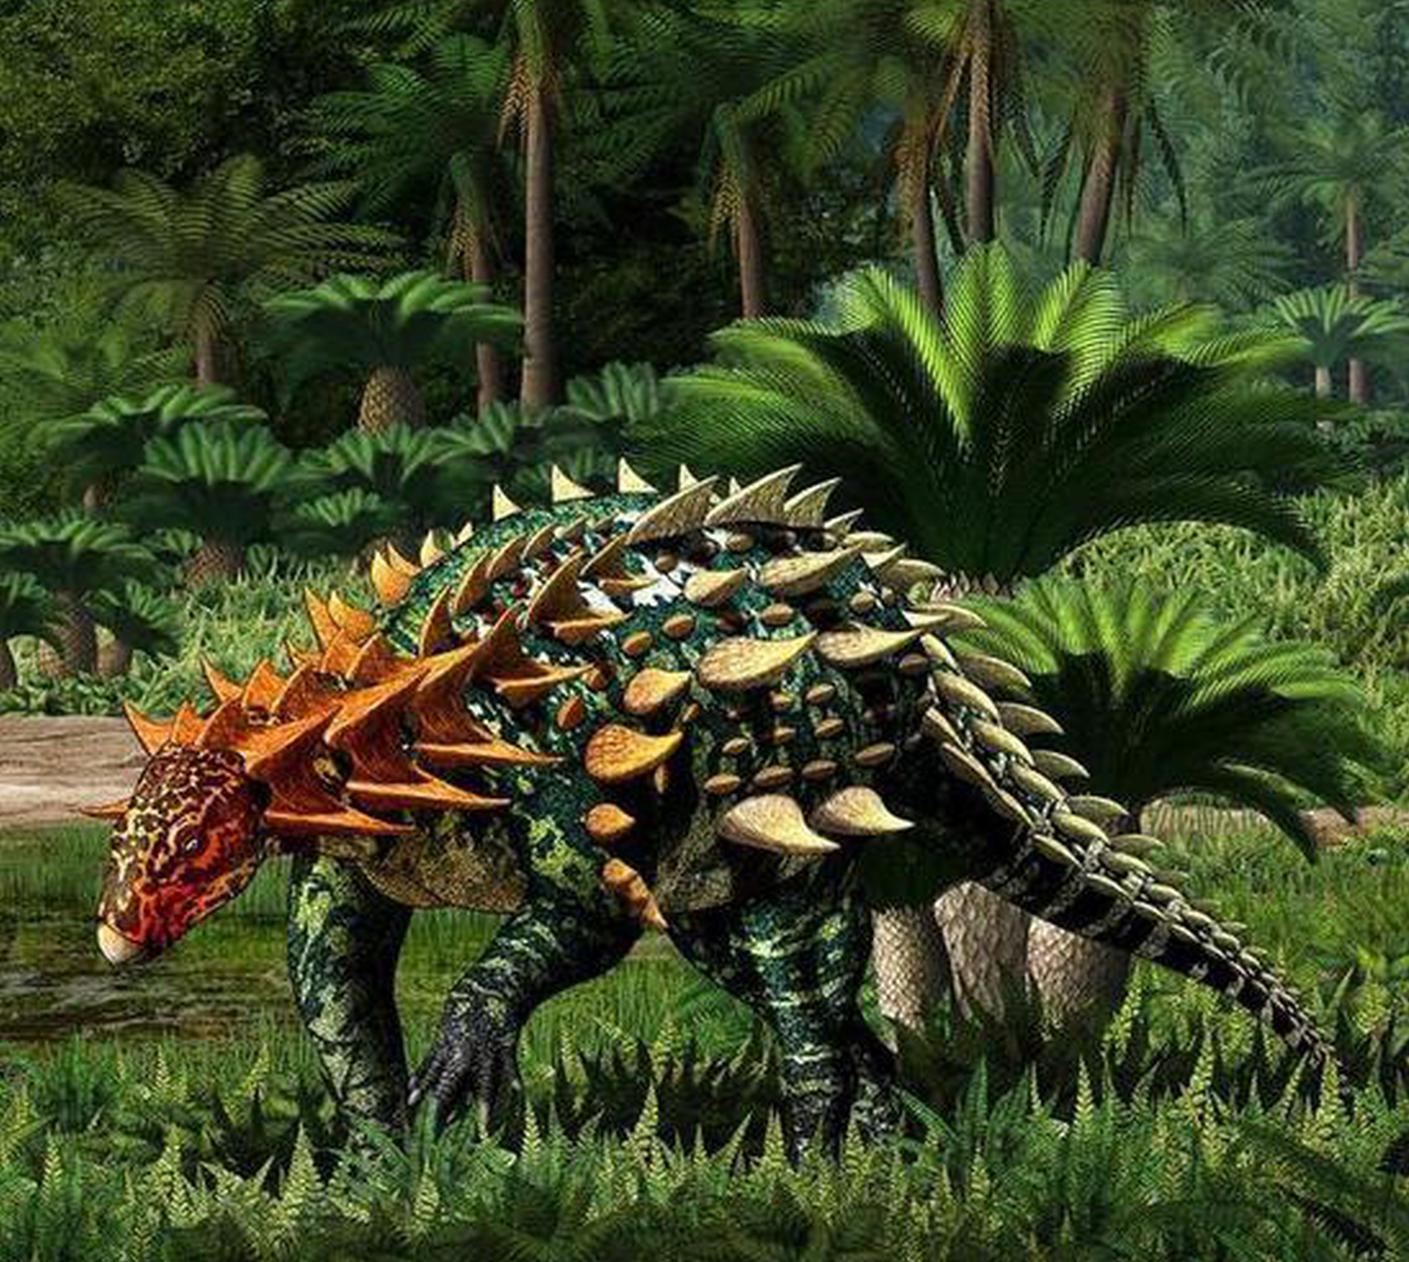 Asia's earliest known armored dinosaur from the Lower Jurassic found in SW China